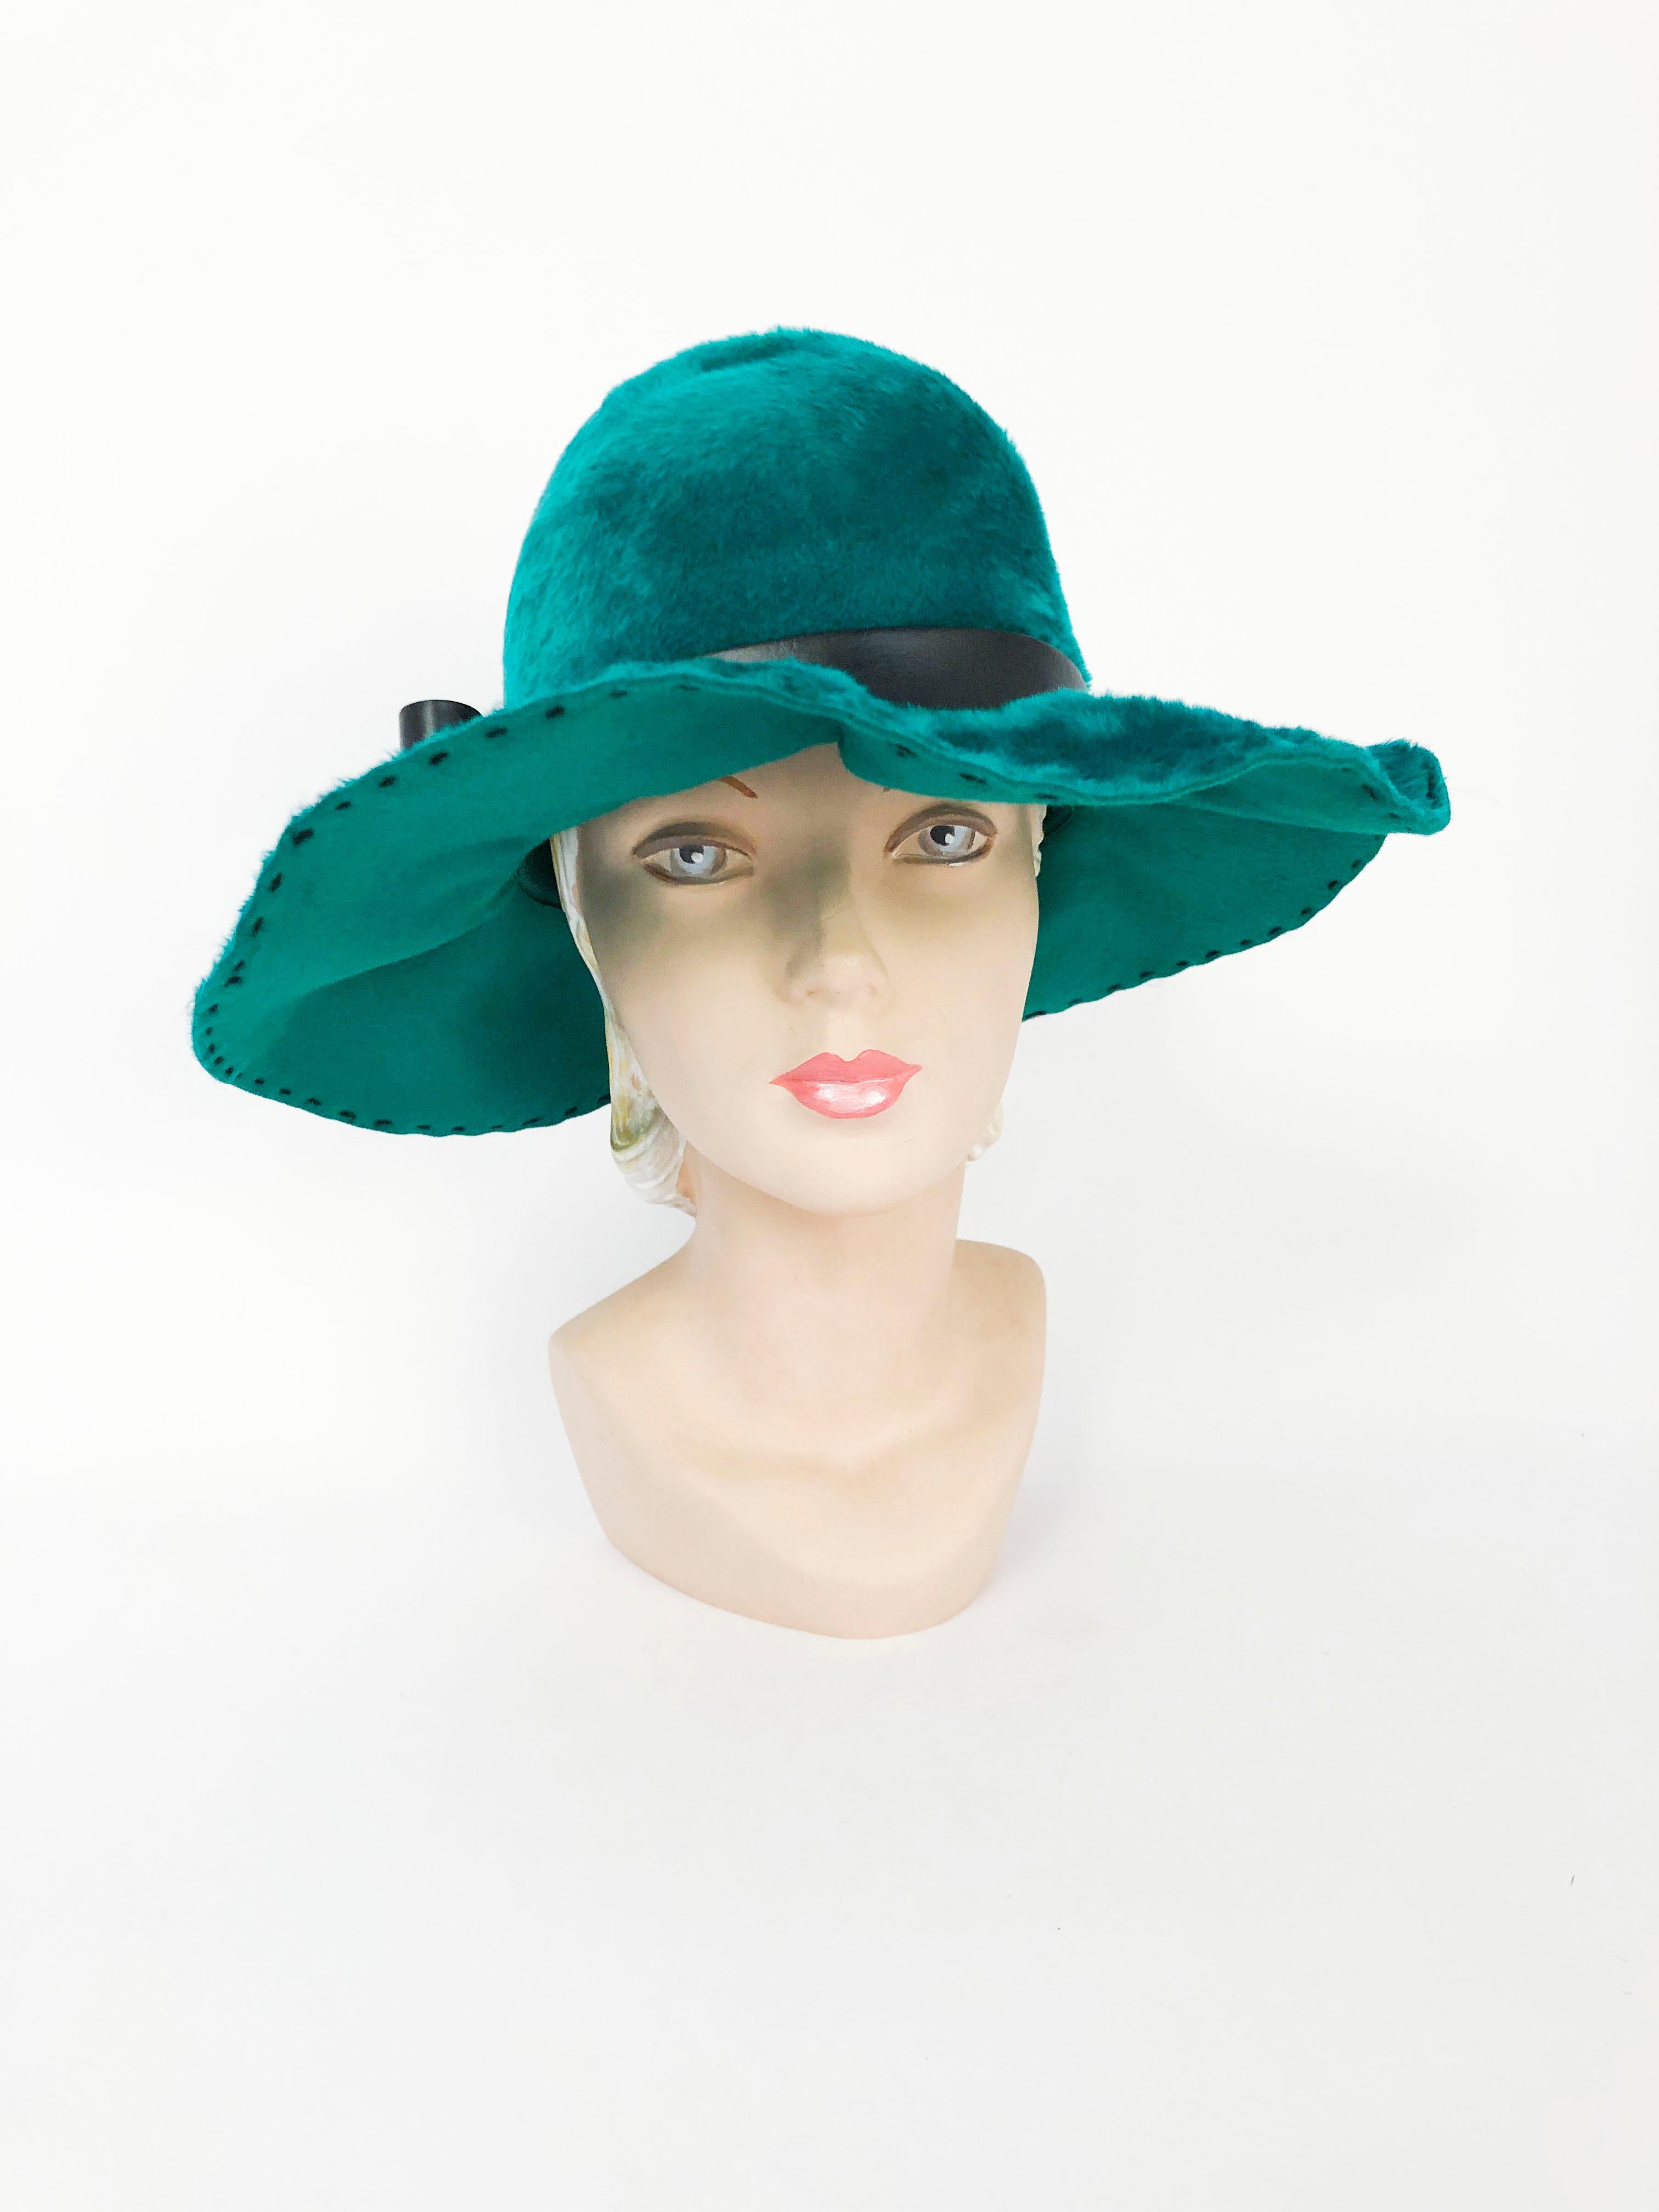 1970s Teal/Green rabbit felt hat with black topstitch along the brim and across one side of the top. Black faux leather band and bow and a shaped crown